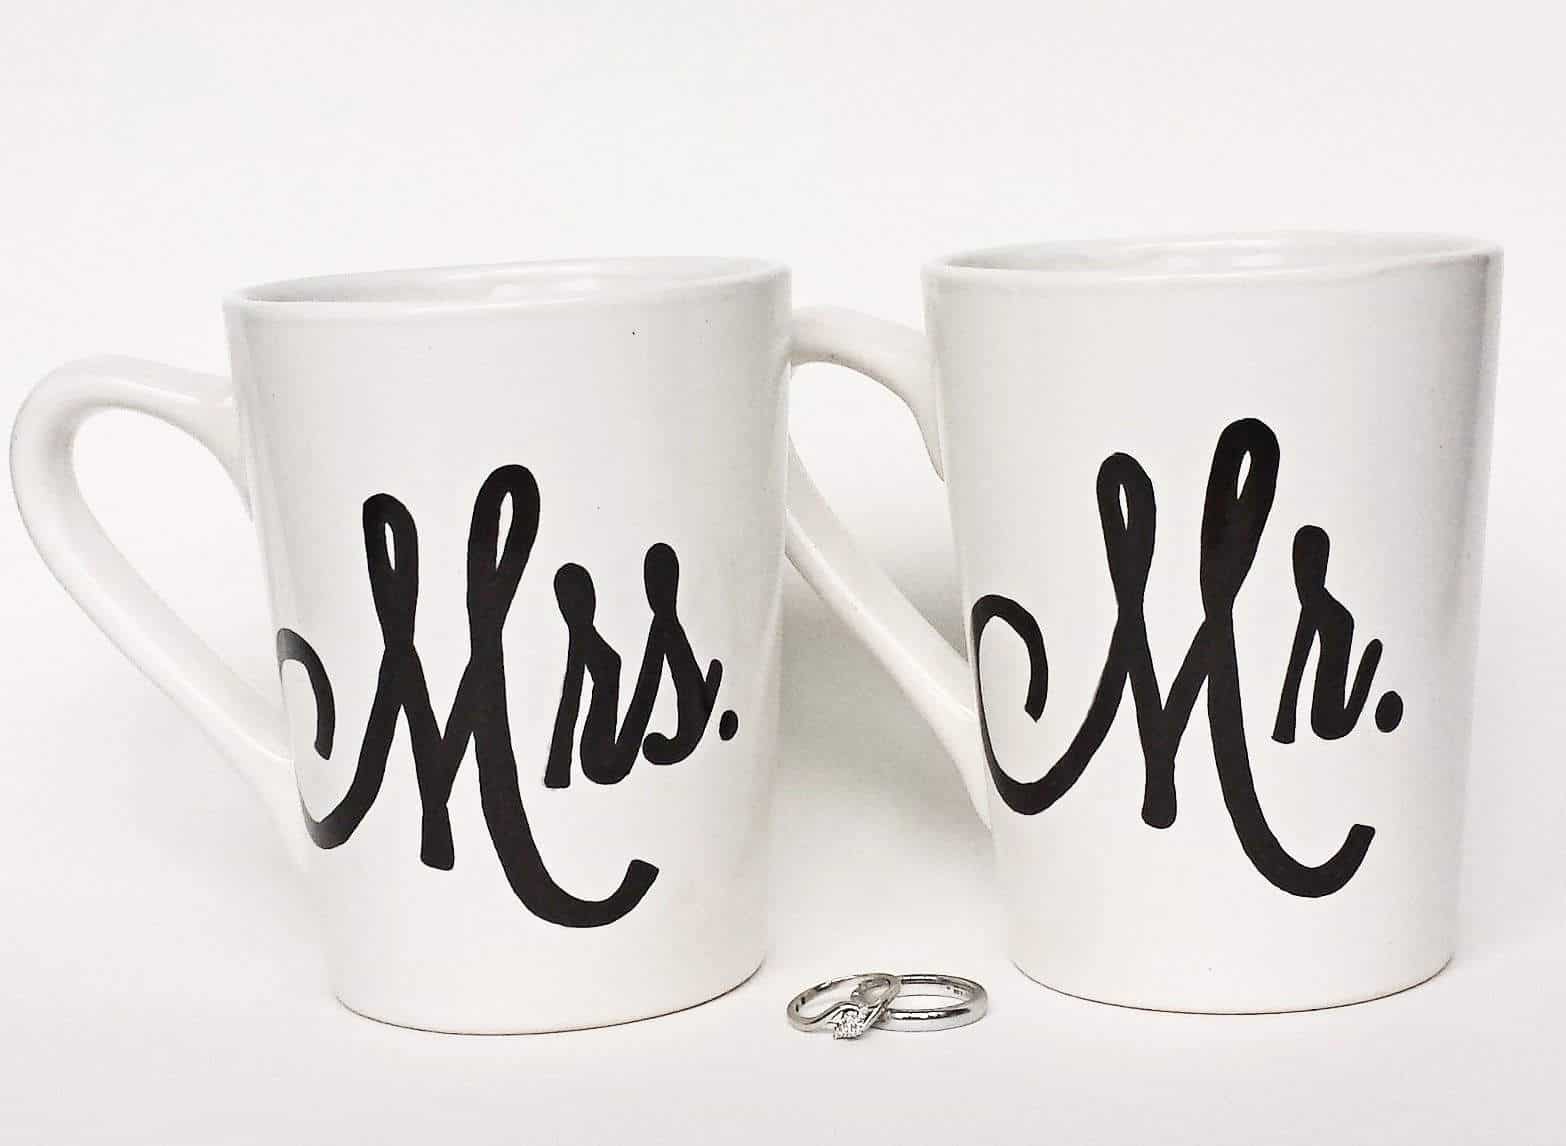 Mr and Mrs Mugs - Are you struggling to figure out what to get your favorite newlyweds? Don't stress! We've got the perfect thoughtful DIY wedding gifts that every couple will love. 